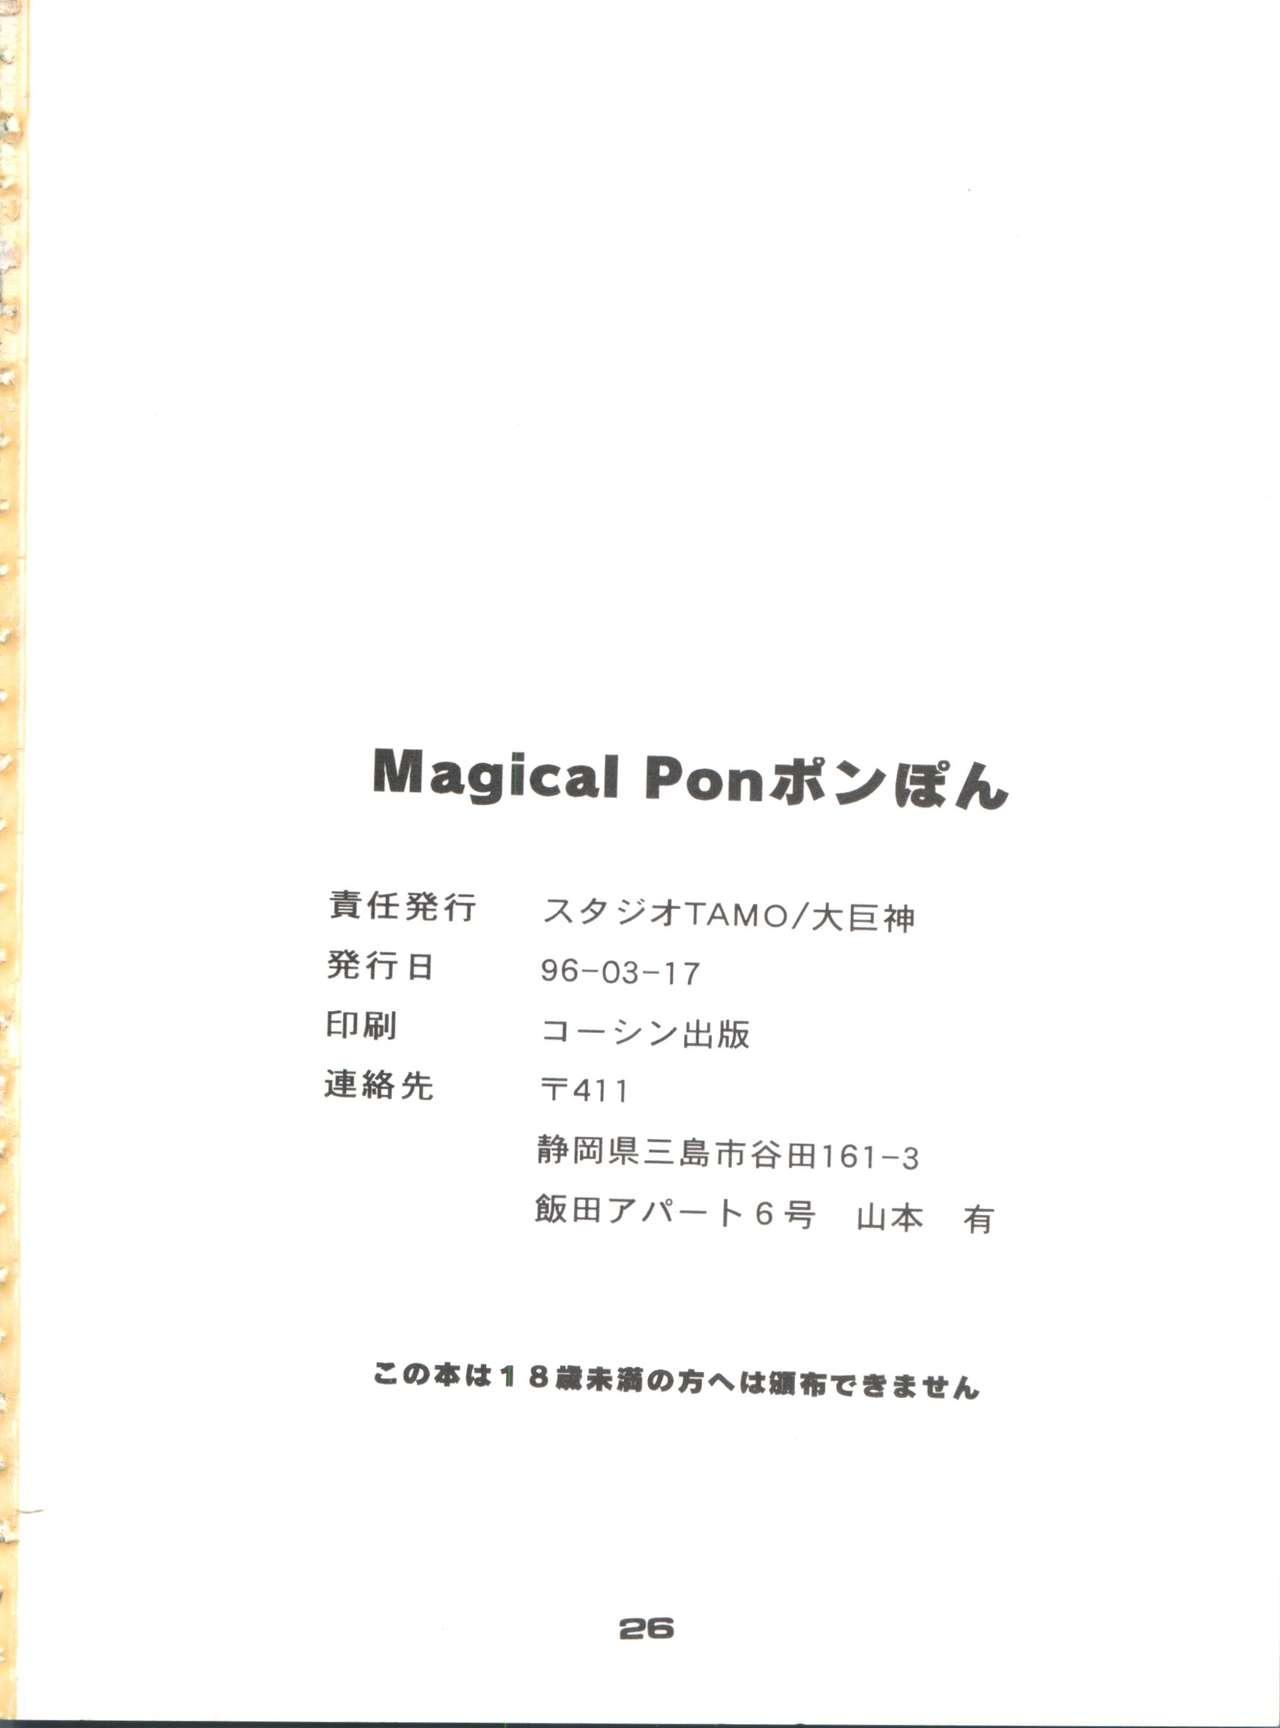 Gay Pawn Magical Ponponpon Returns - Magical emi Petite Teen - Page 25